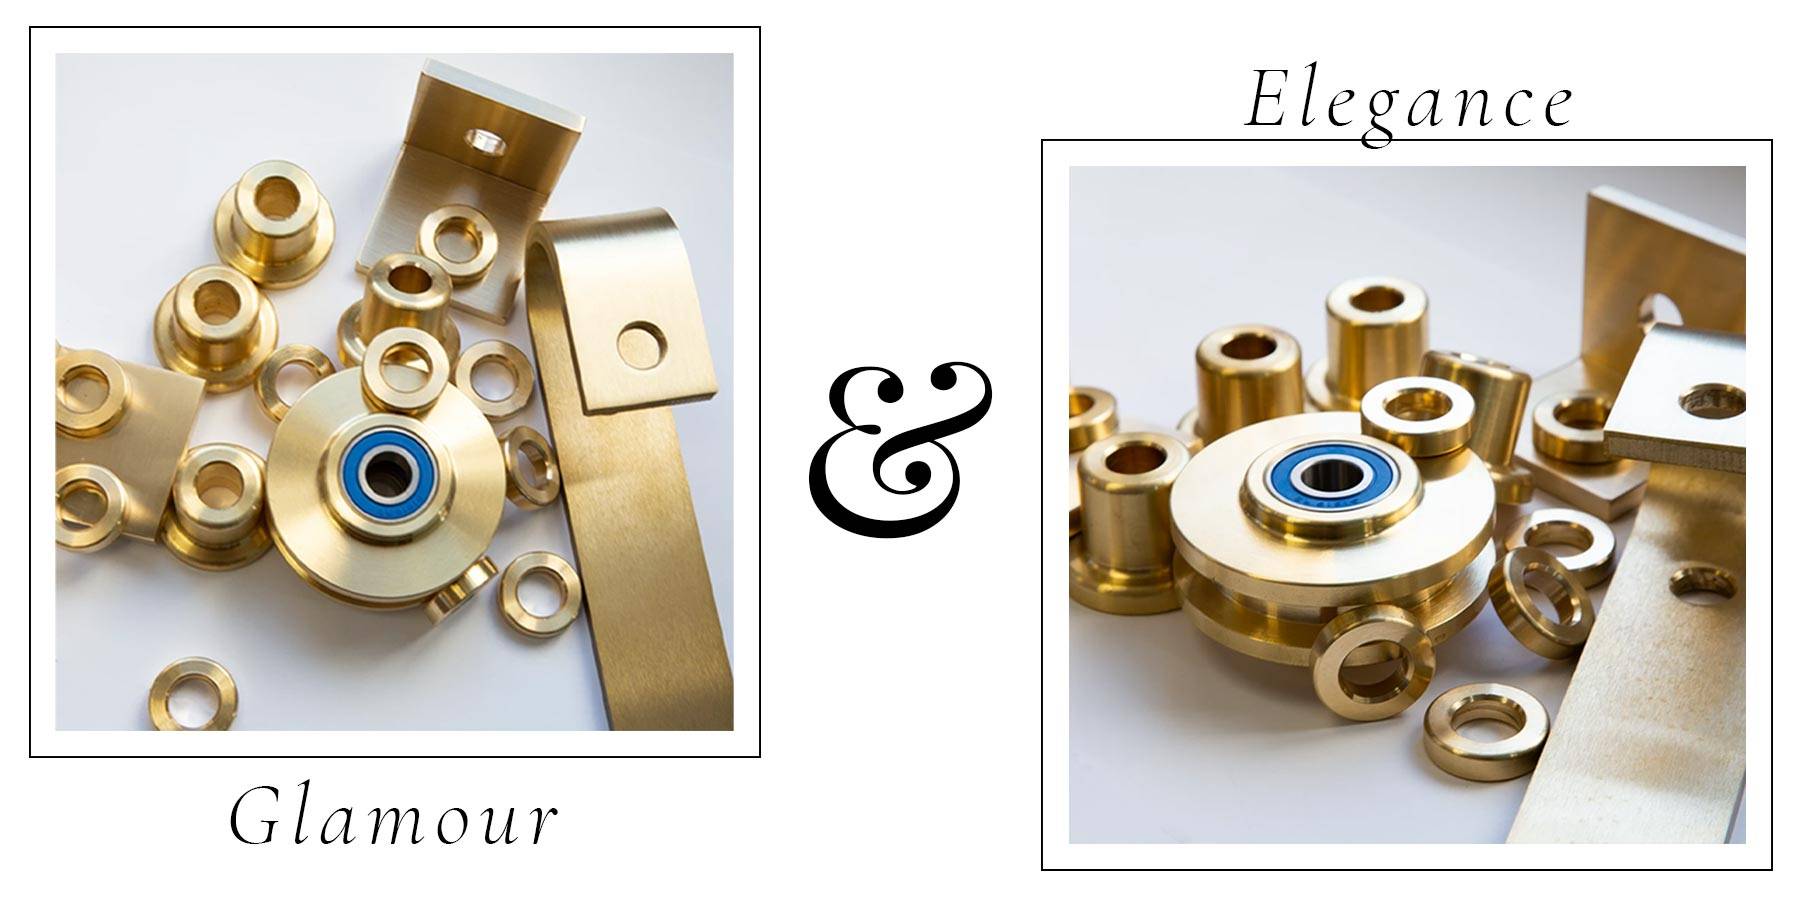 Two square images of the Classic Flat Track Barn Door Hardware parts side by side with the words 